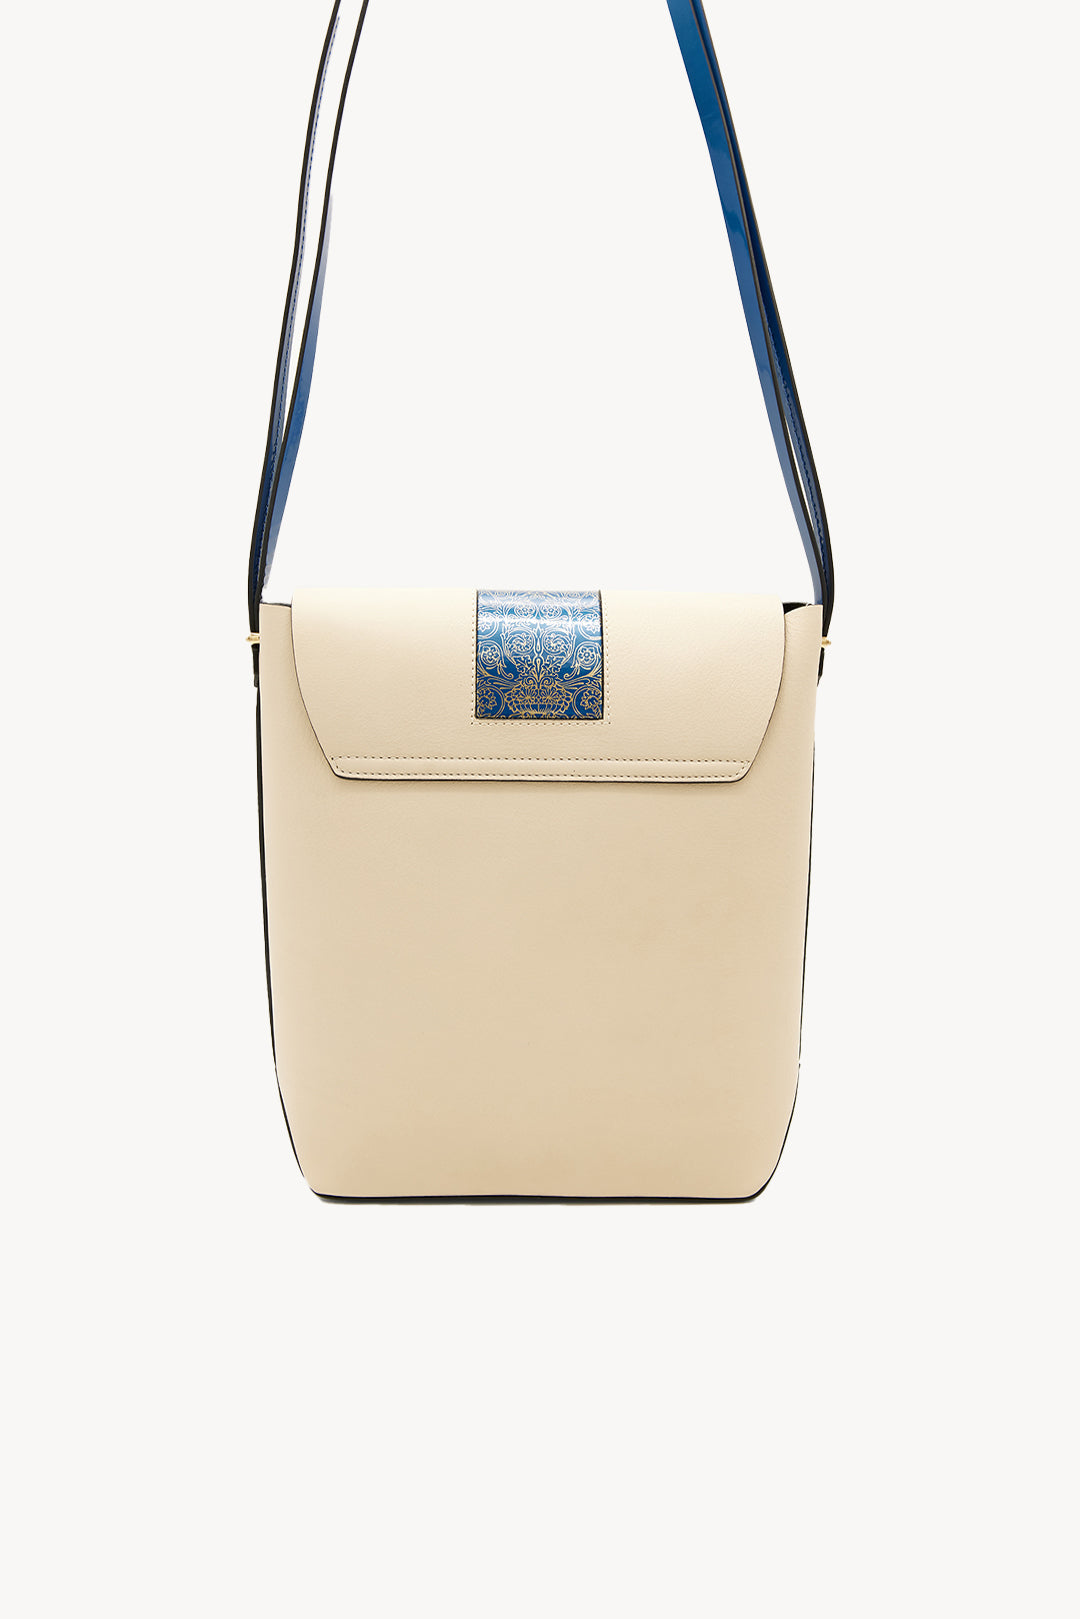 Shopping bag with shoulder strap - Ivory and Blue